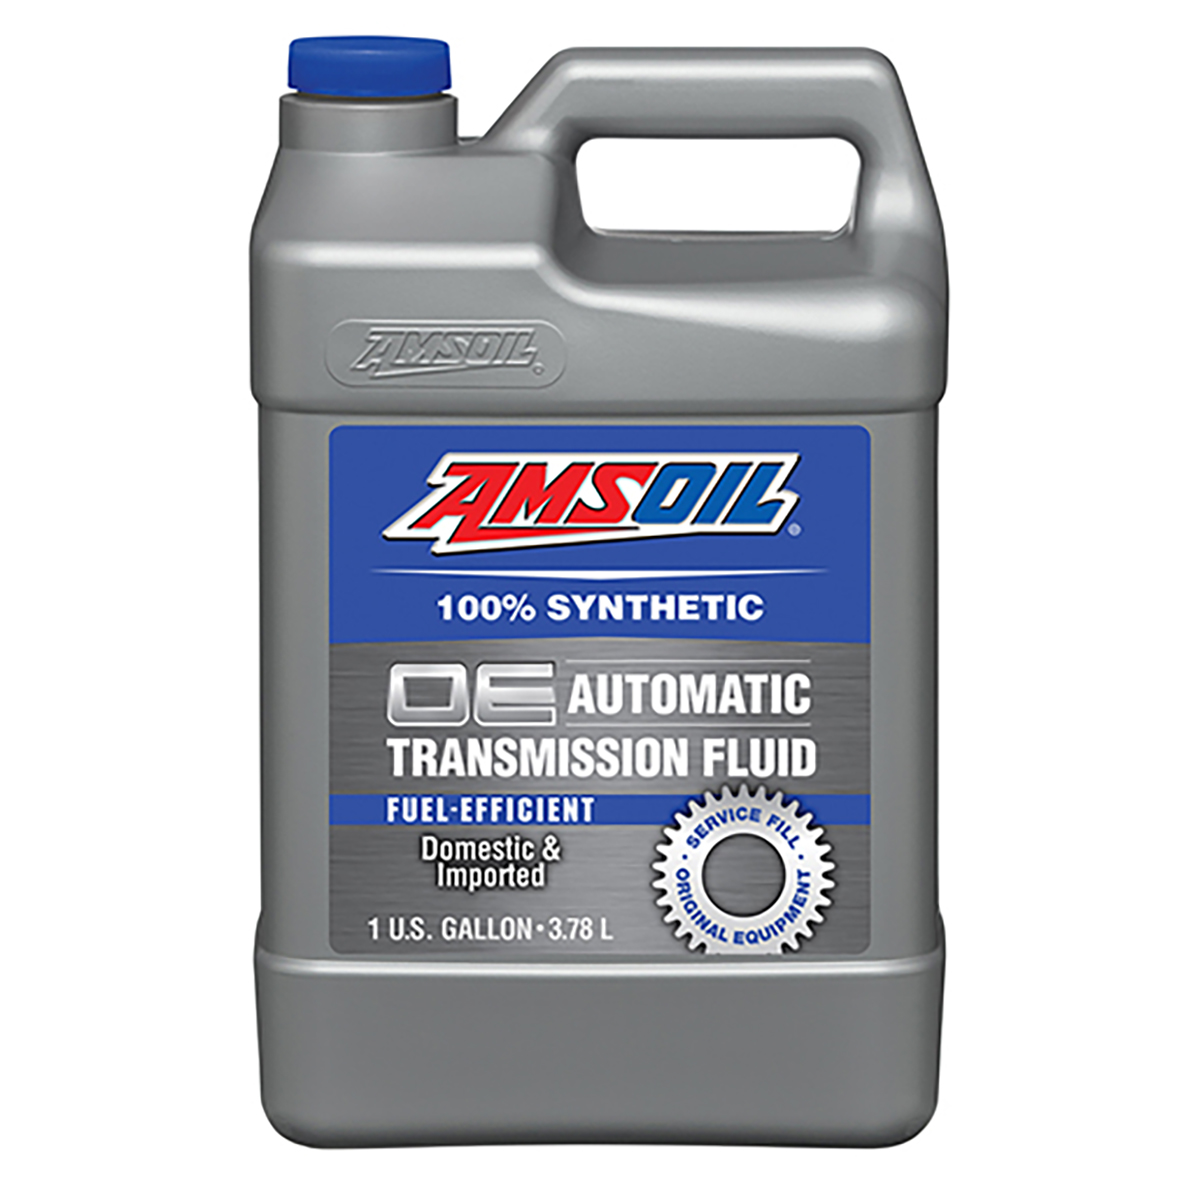 OE Fuel-Efficient Synthetic Automatic Transmission Fluid, 1G